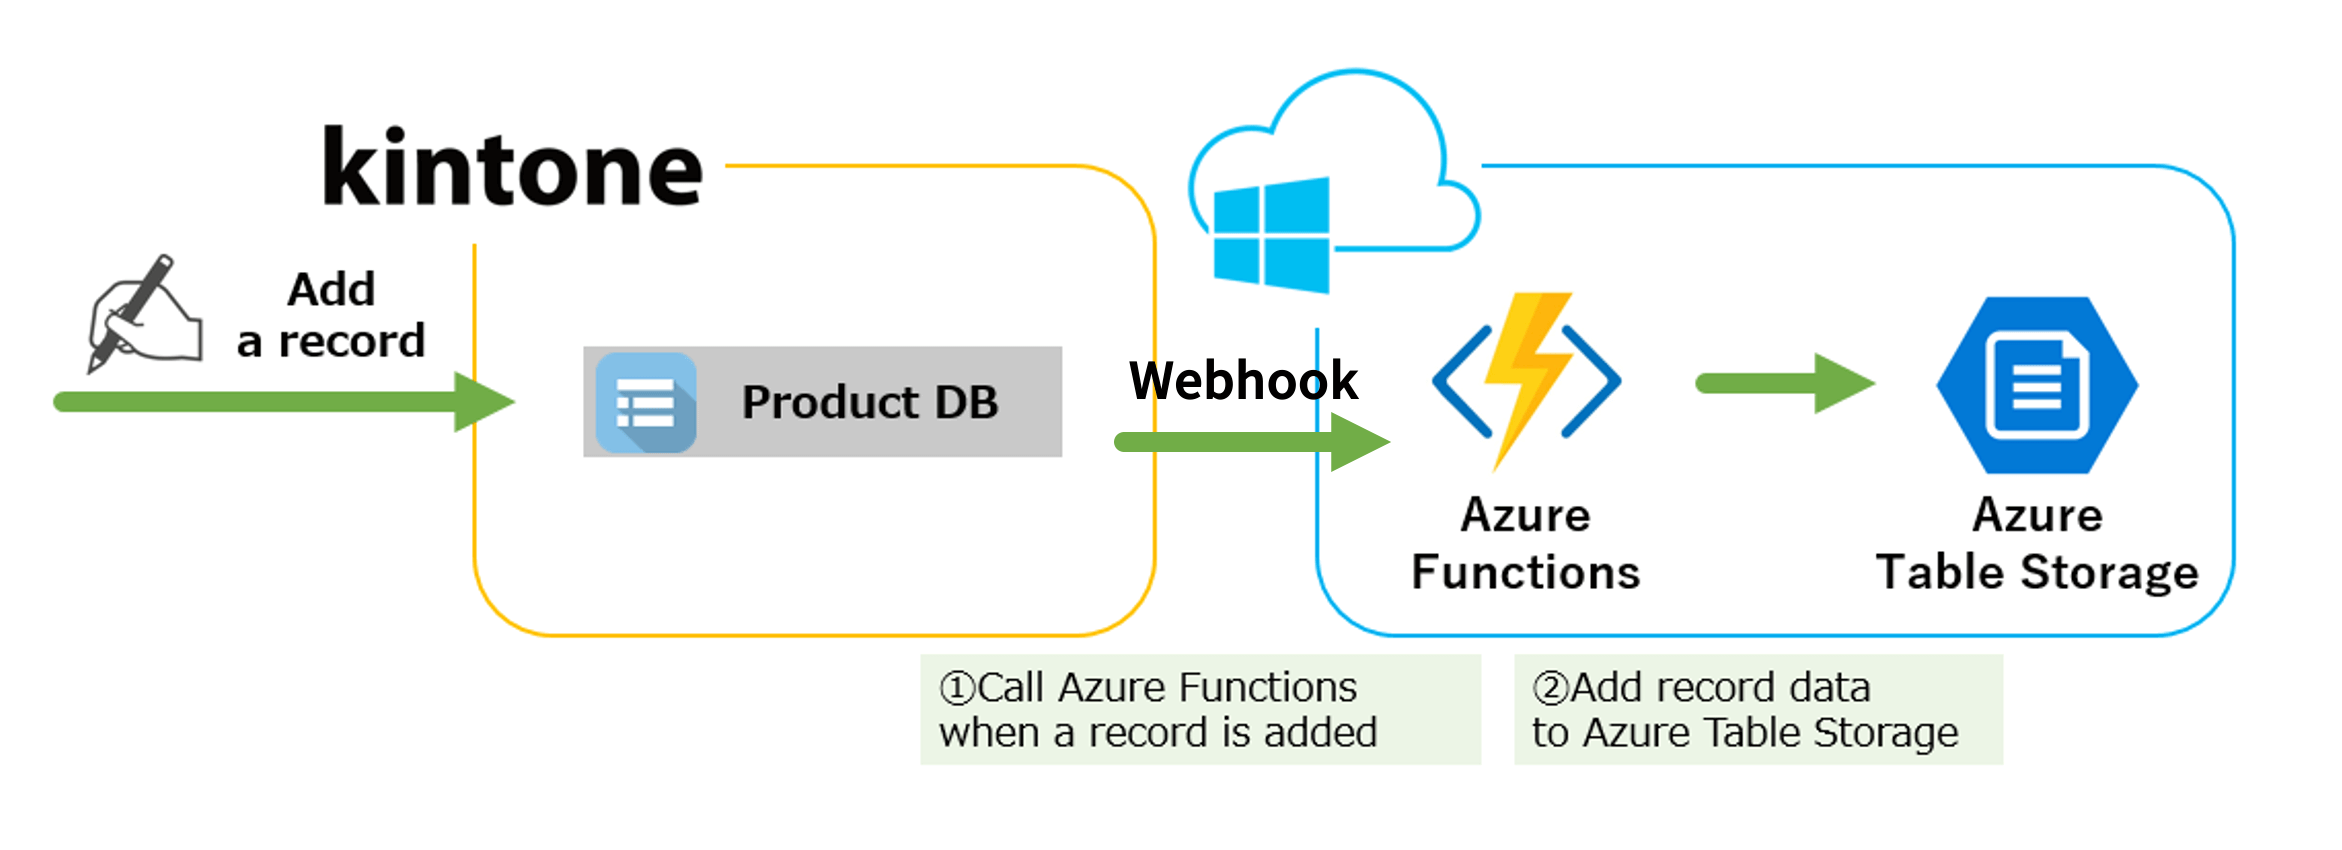 Image: When a record is added into the Kintone App, a webhook is send to Azure Functions, which stores the data into Azure Table Storage.